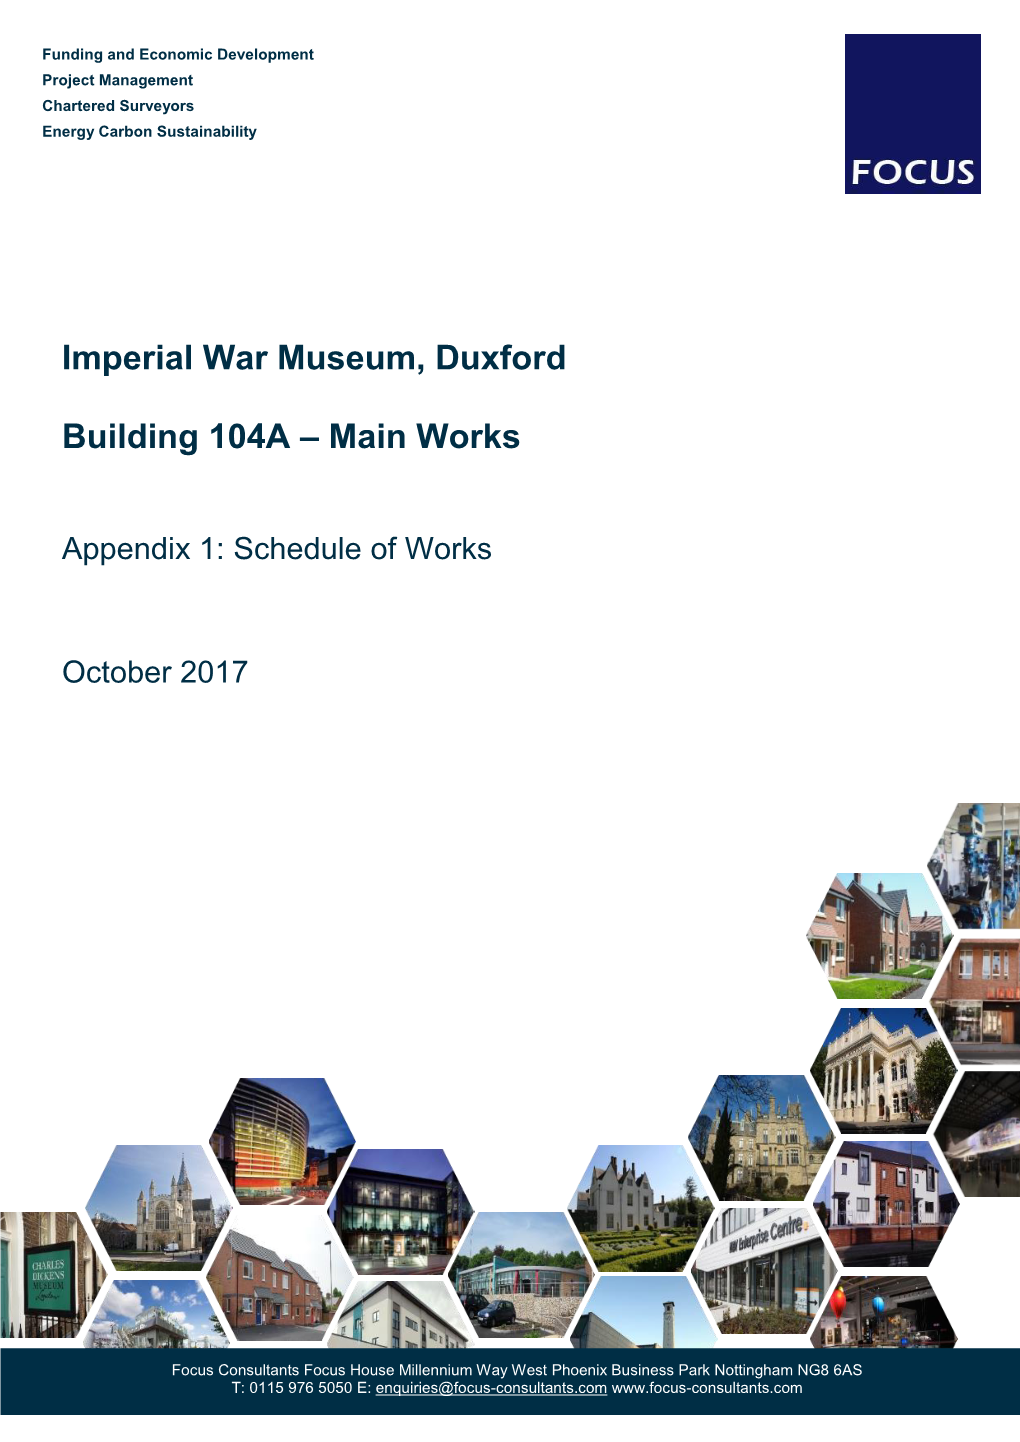 Imperial War Museum, Duxford Building 104A – Main Works